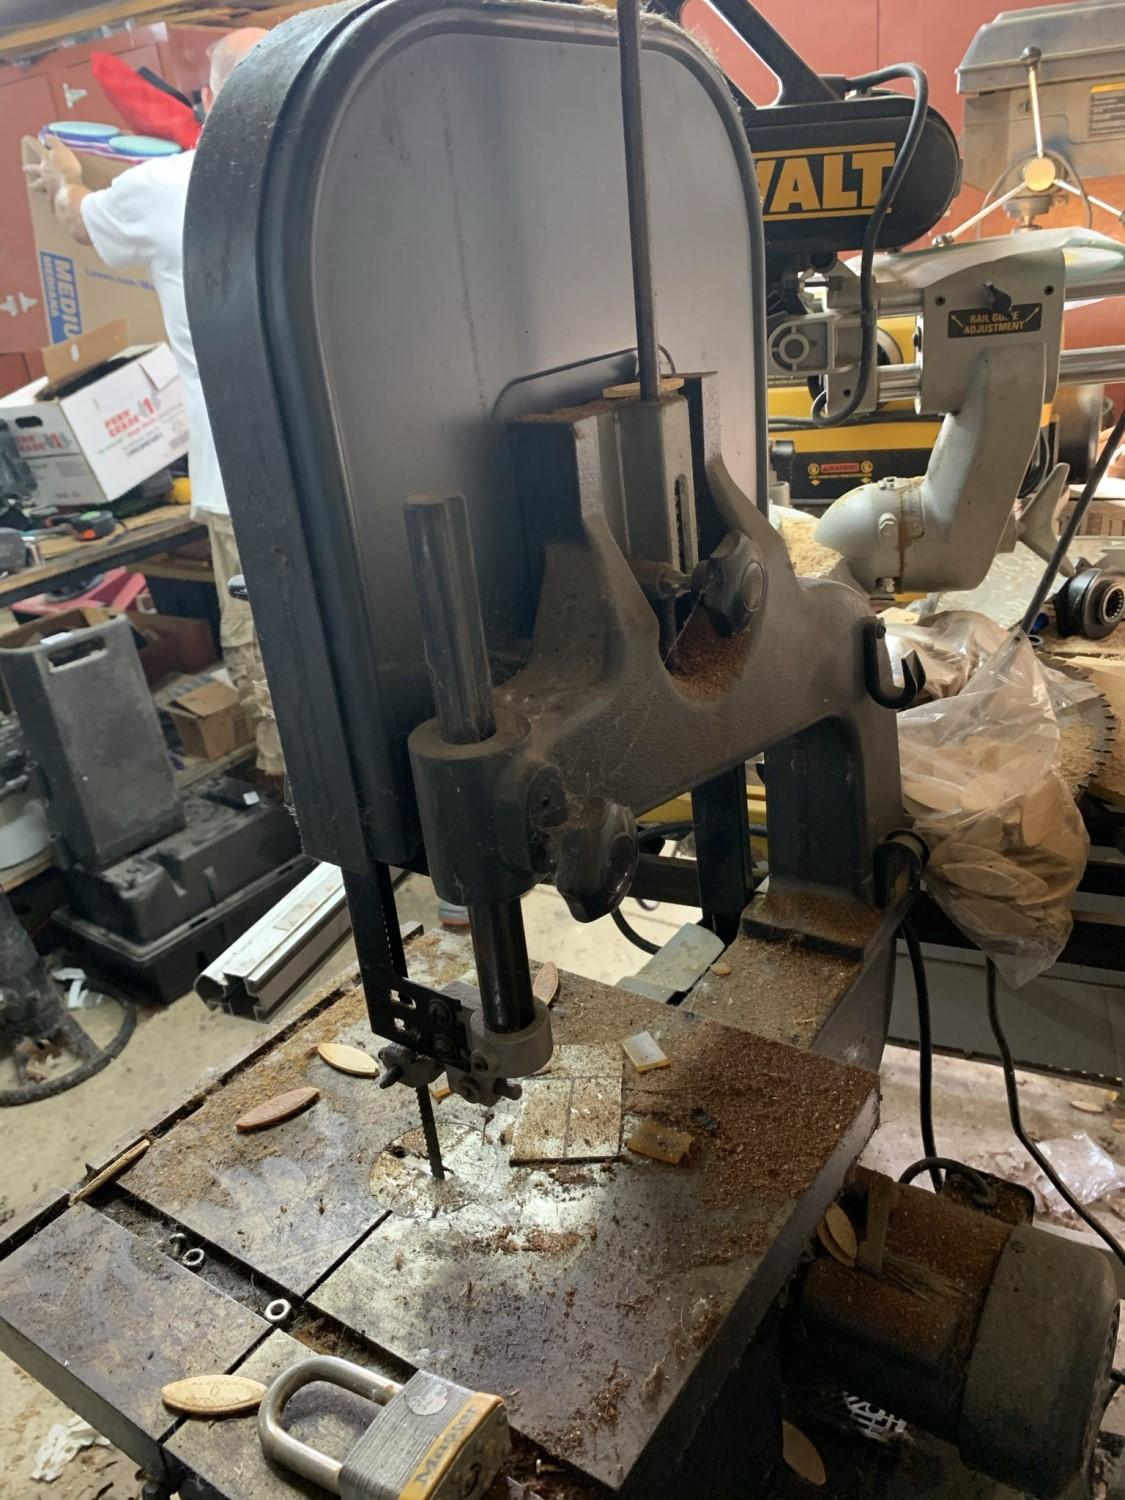 Craftsman 12 in Band Saw